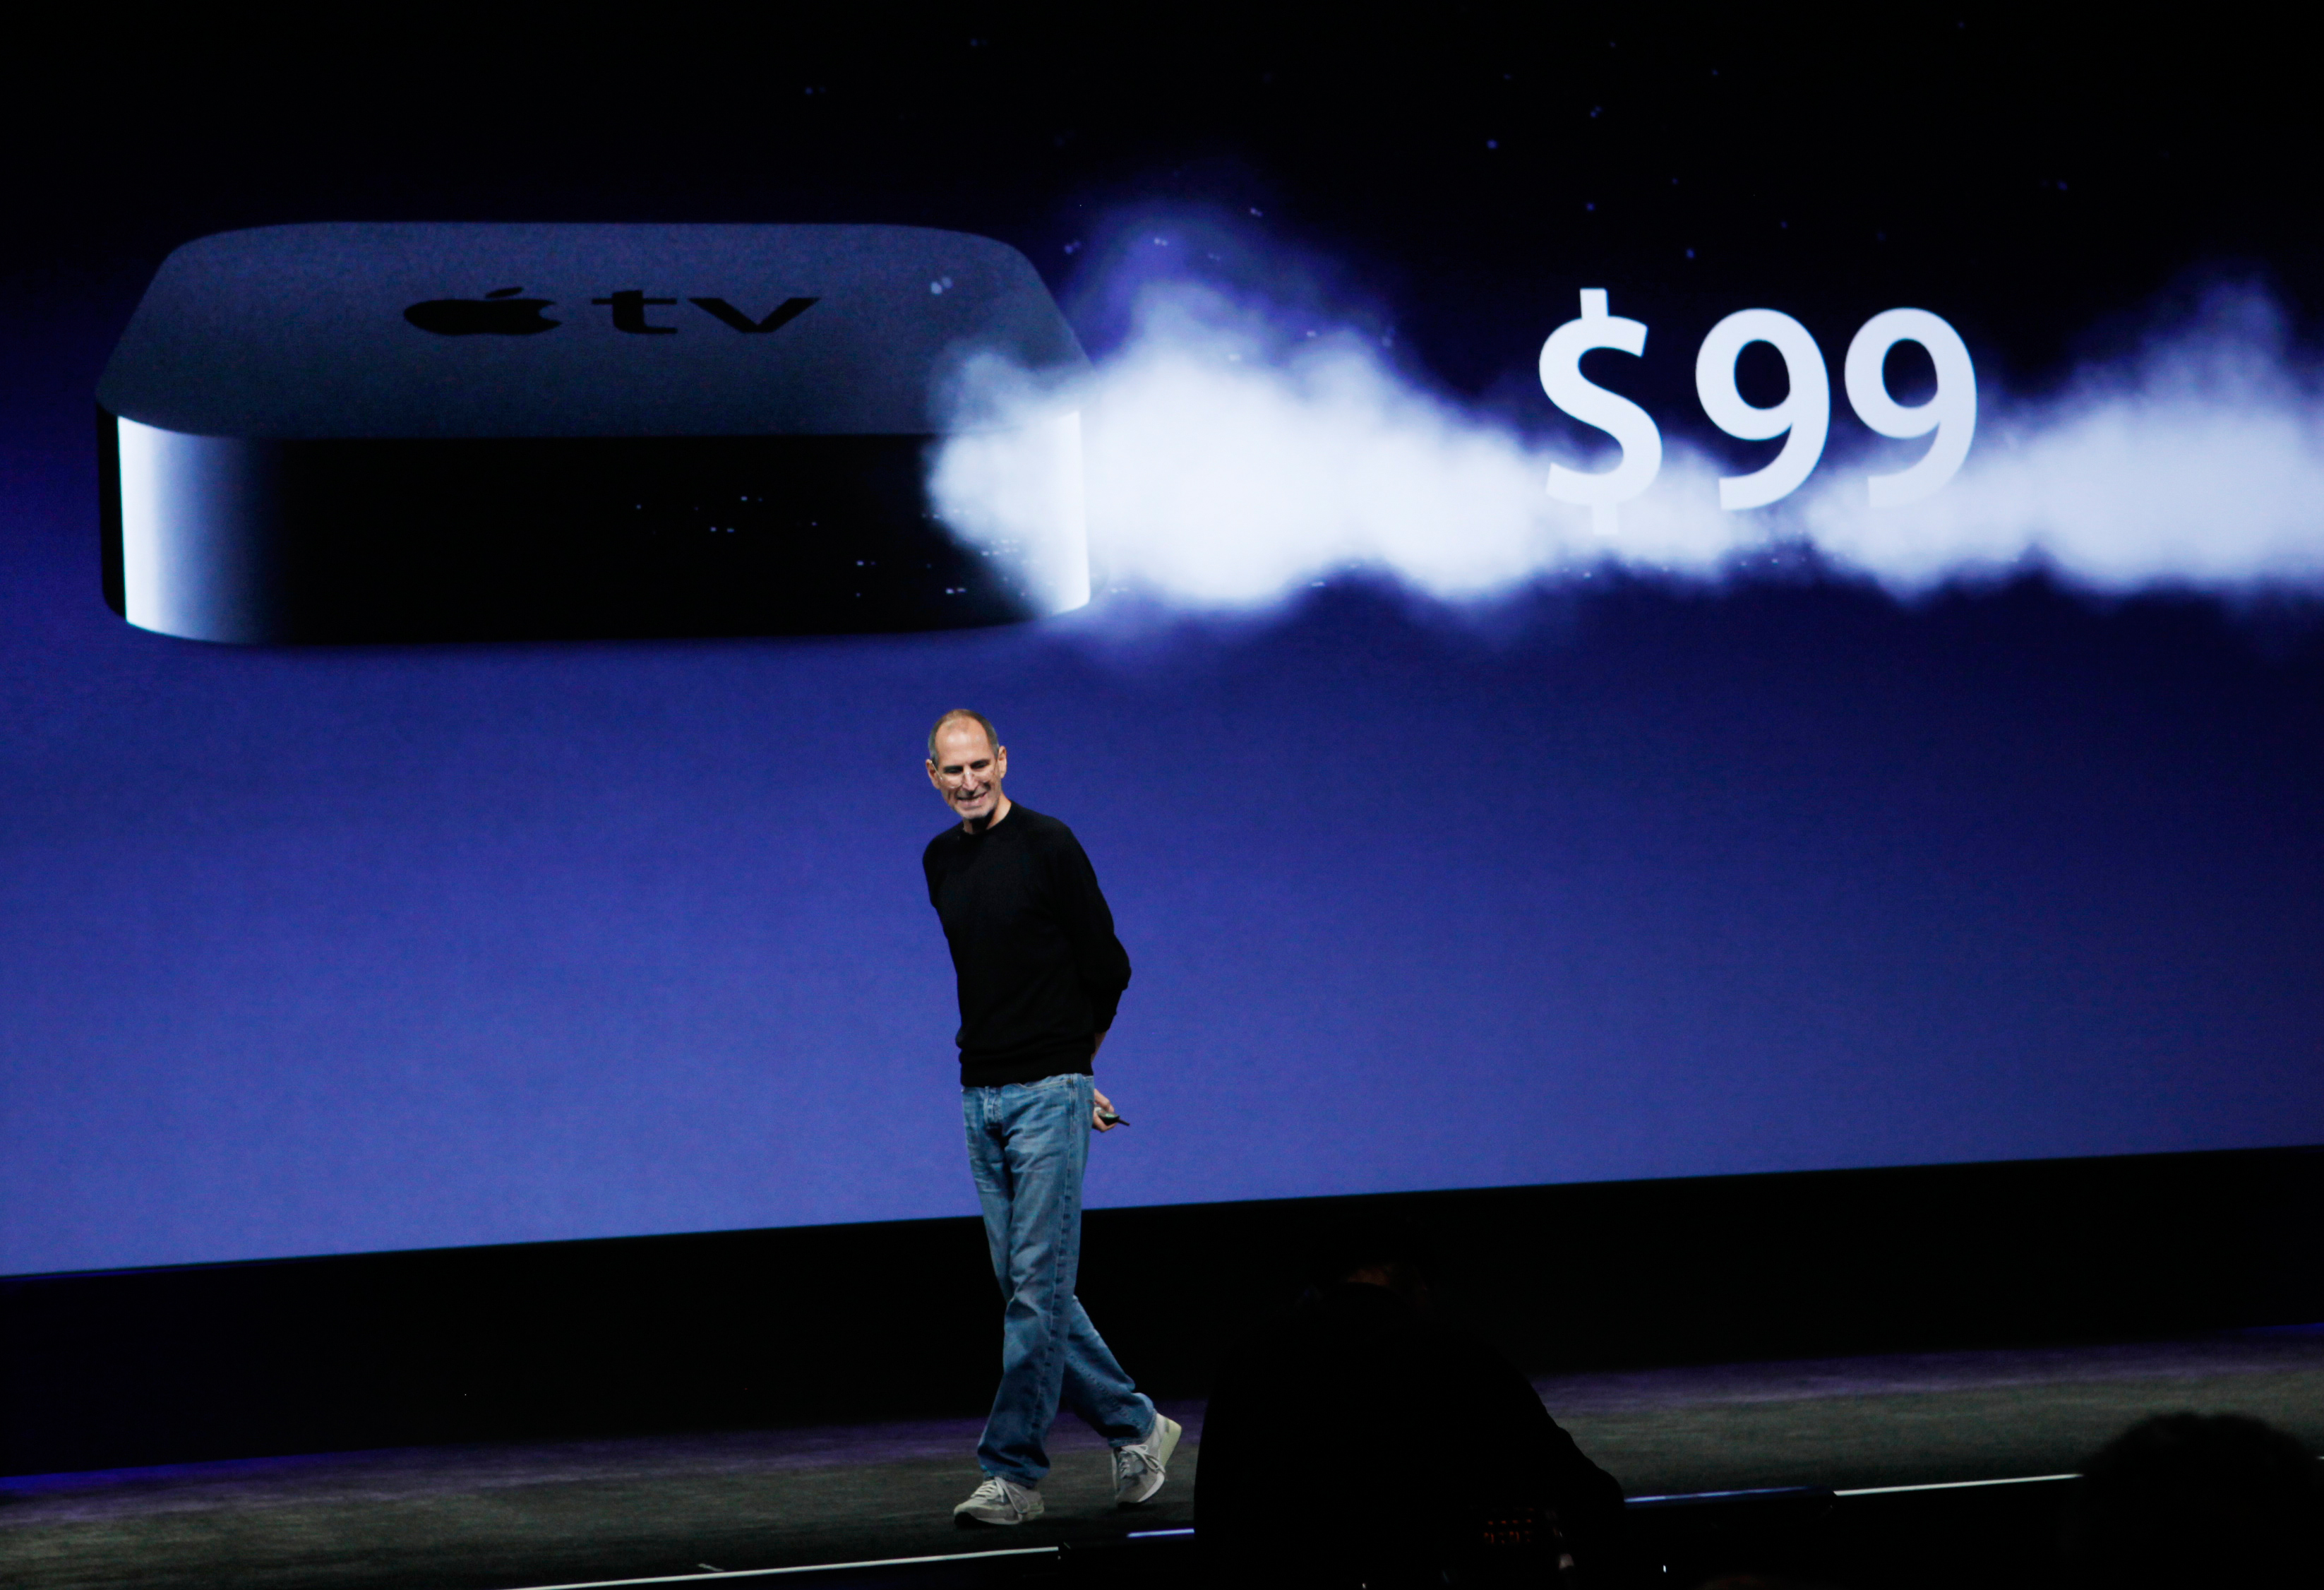 Three and a half years after the Apple TV's initial launch, Apple completely rebuilt the product as a much smaller device that streamed content from Netflix, YouTube, and users' home computers. The slimmer product also came with a slimmer price: $99.